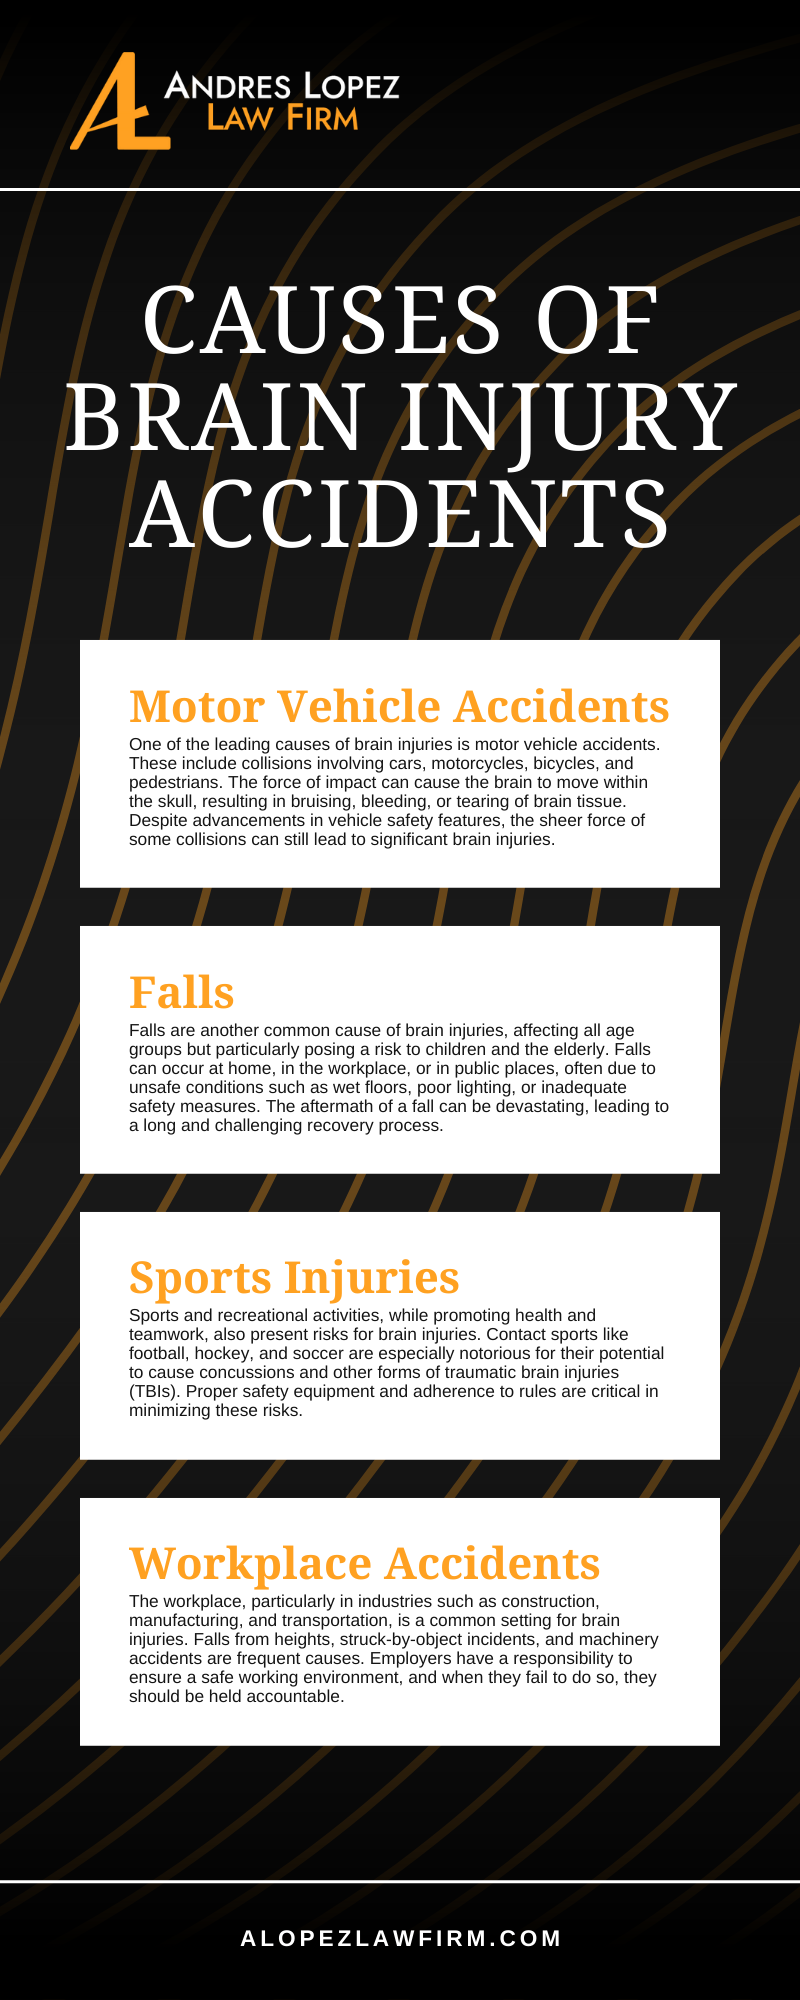 Causes Of Brain Injury Accidents Infographic